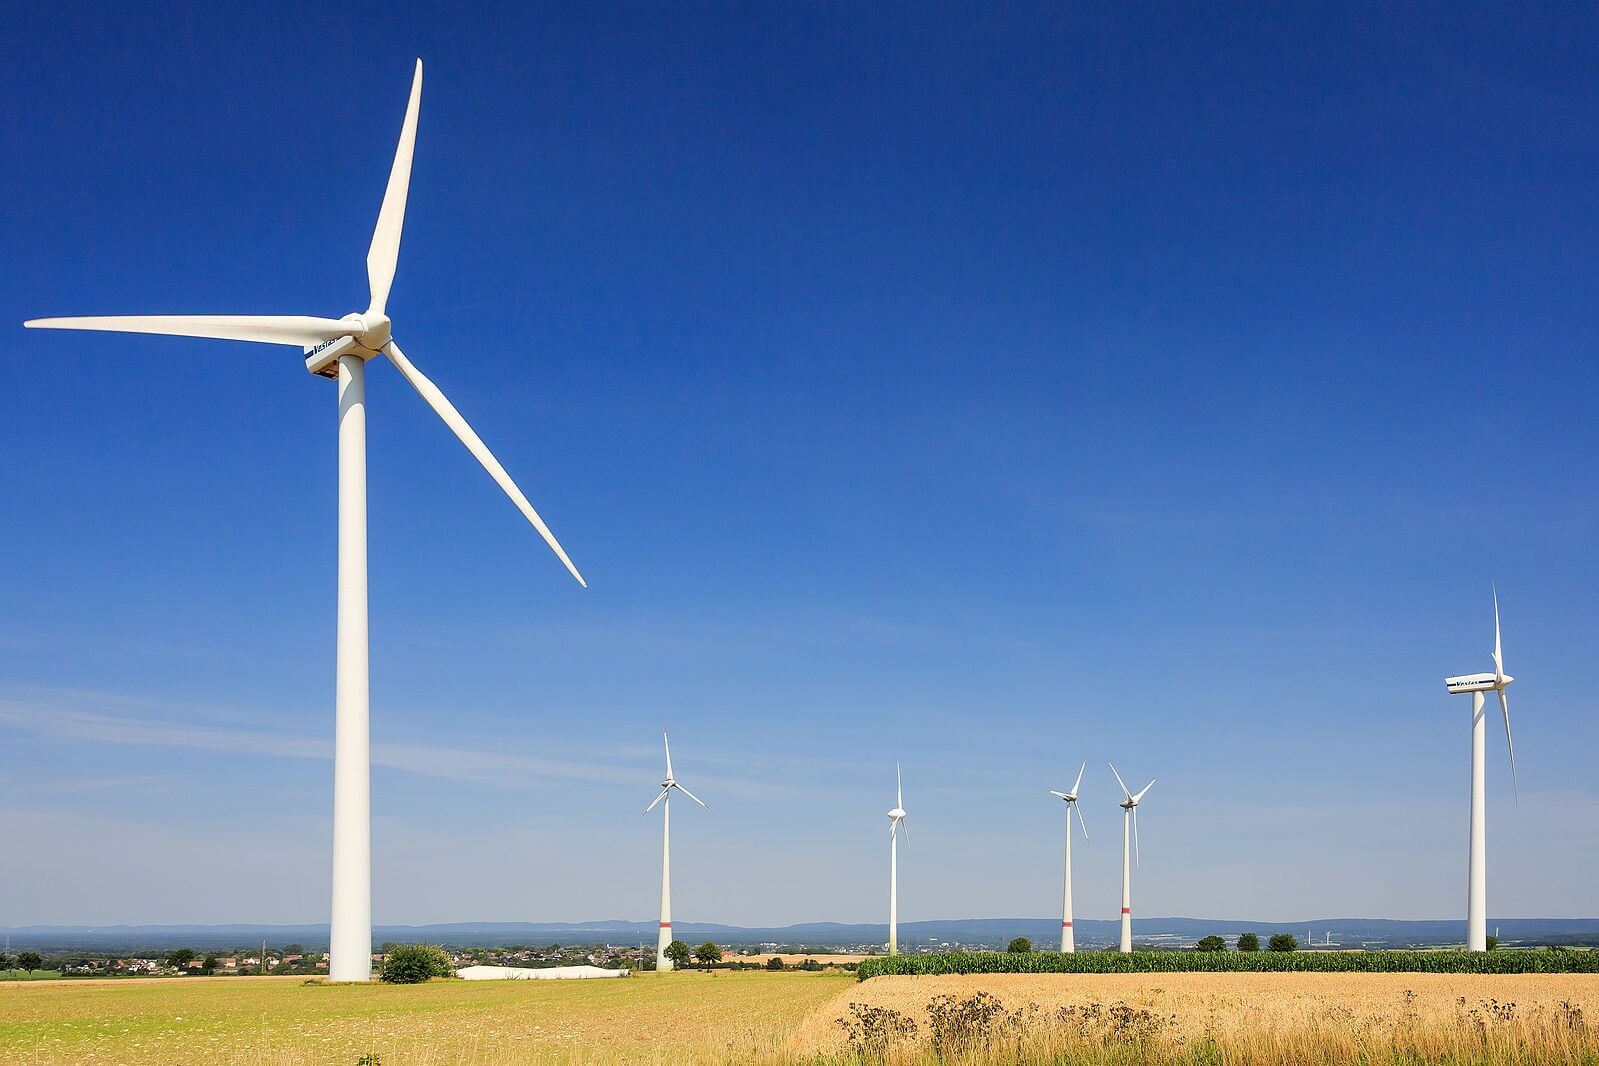 Google and DeepMind bring machine learning and better efficiency to wind farms